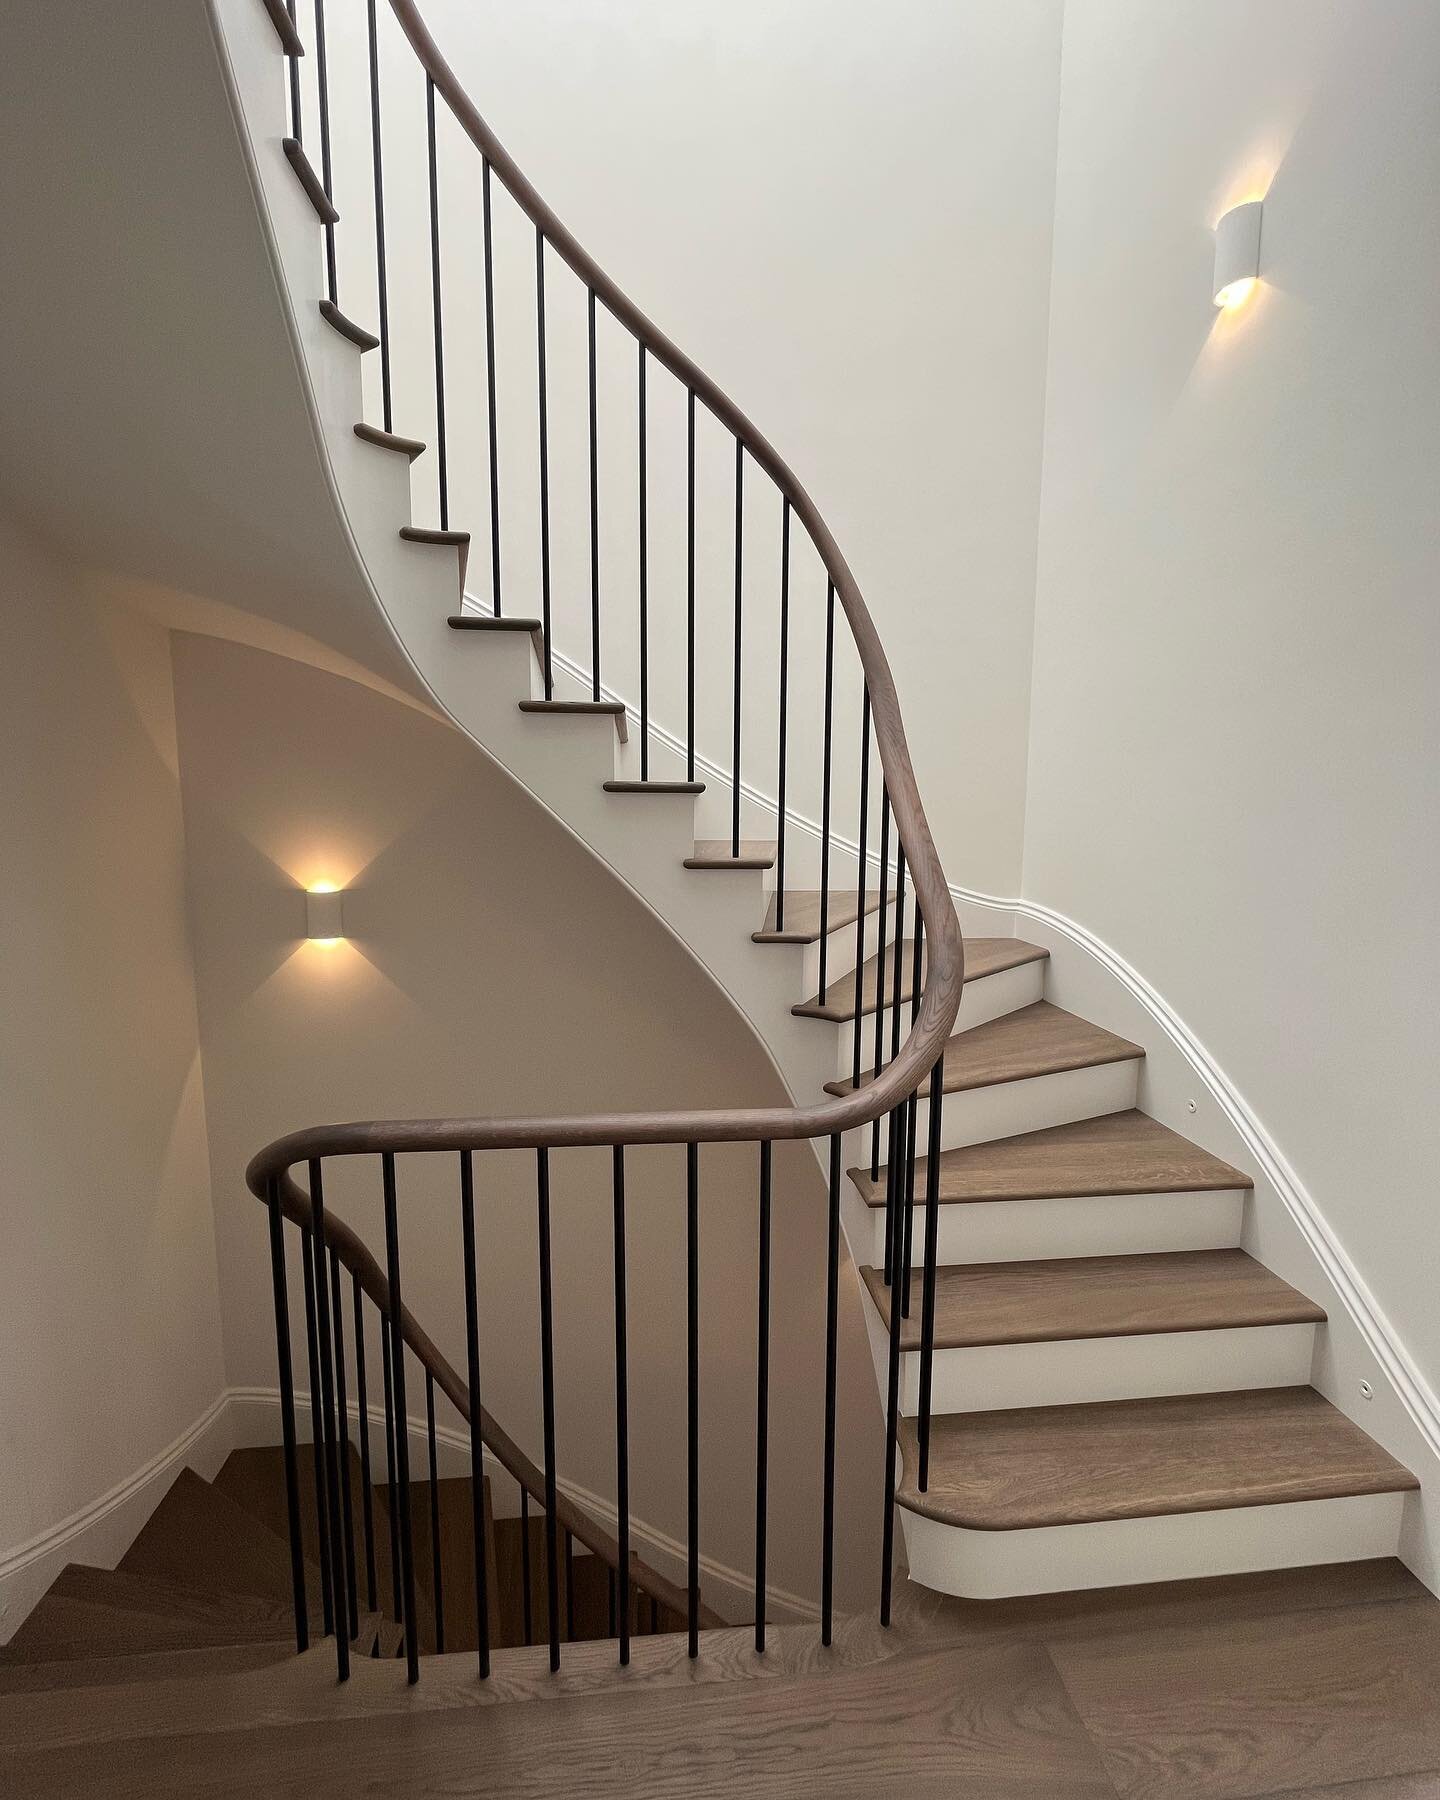 The curved staircase at our Wandsworth project is truly a thing of beauty. The continuous handrail matches the dark timber floor, whilst the plaster wall lights cast a subtle wash up and down the walls.

Interior design @sarah_brink01 
Architecture @